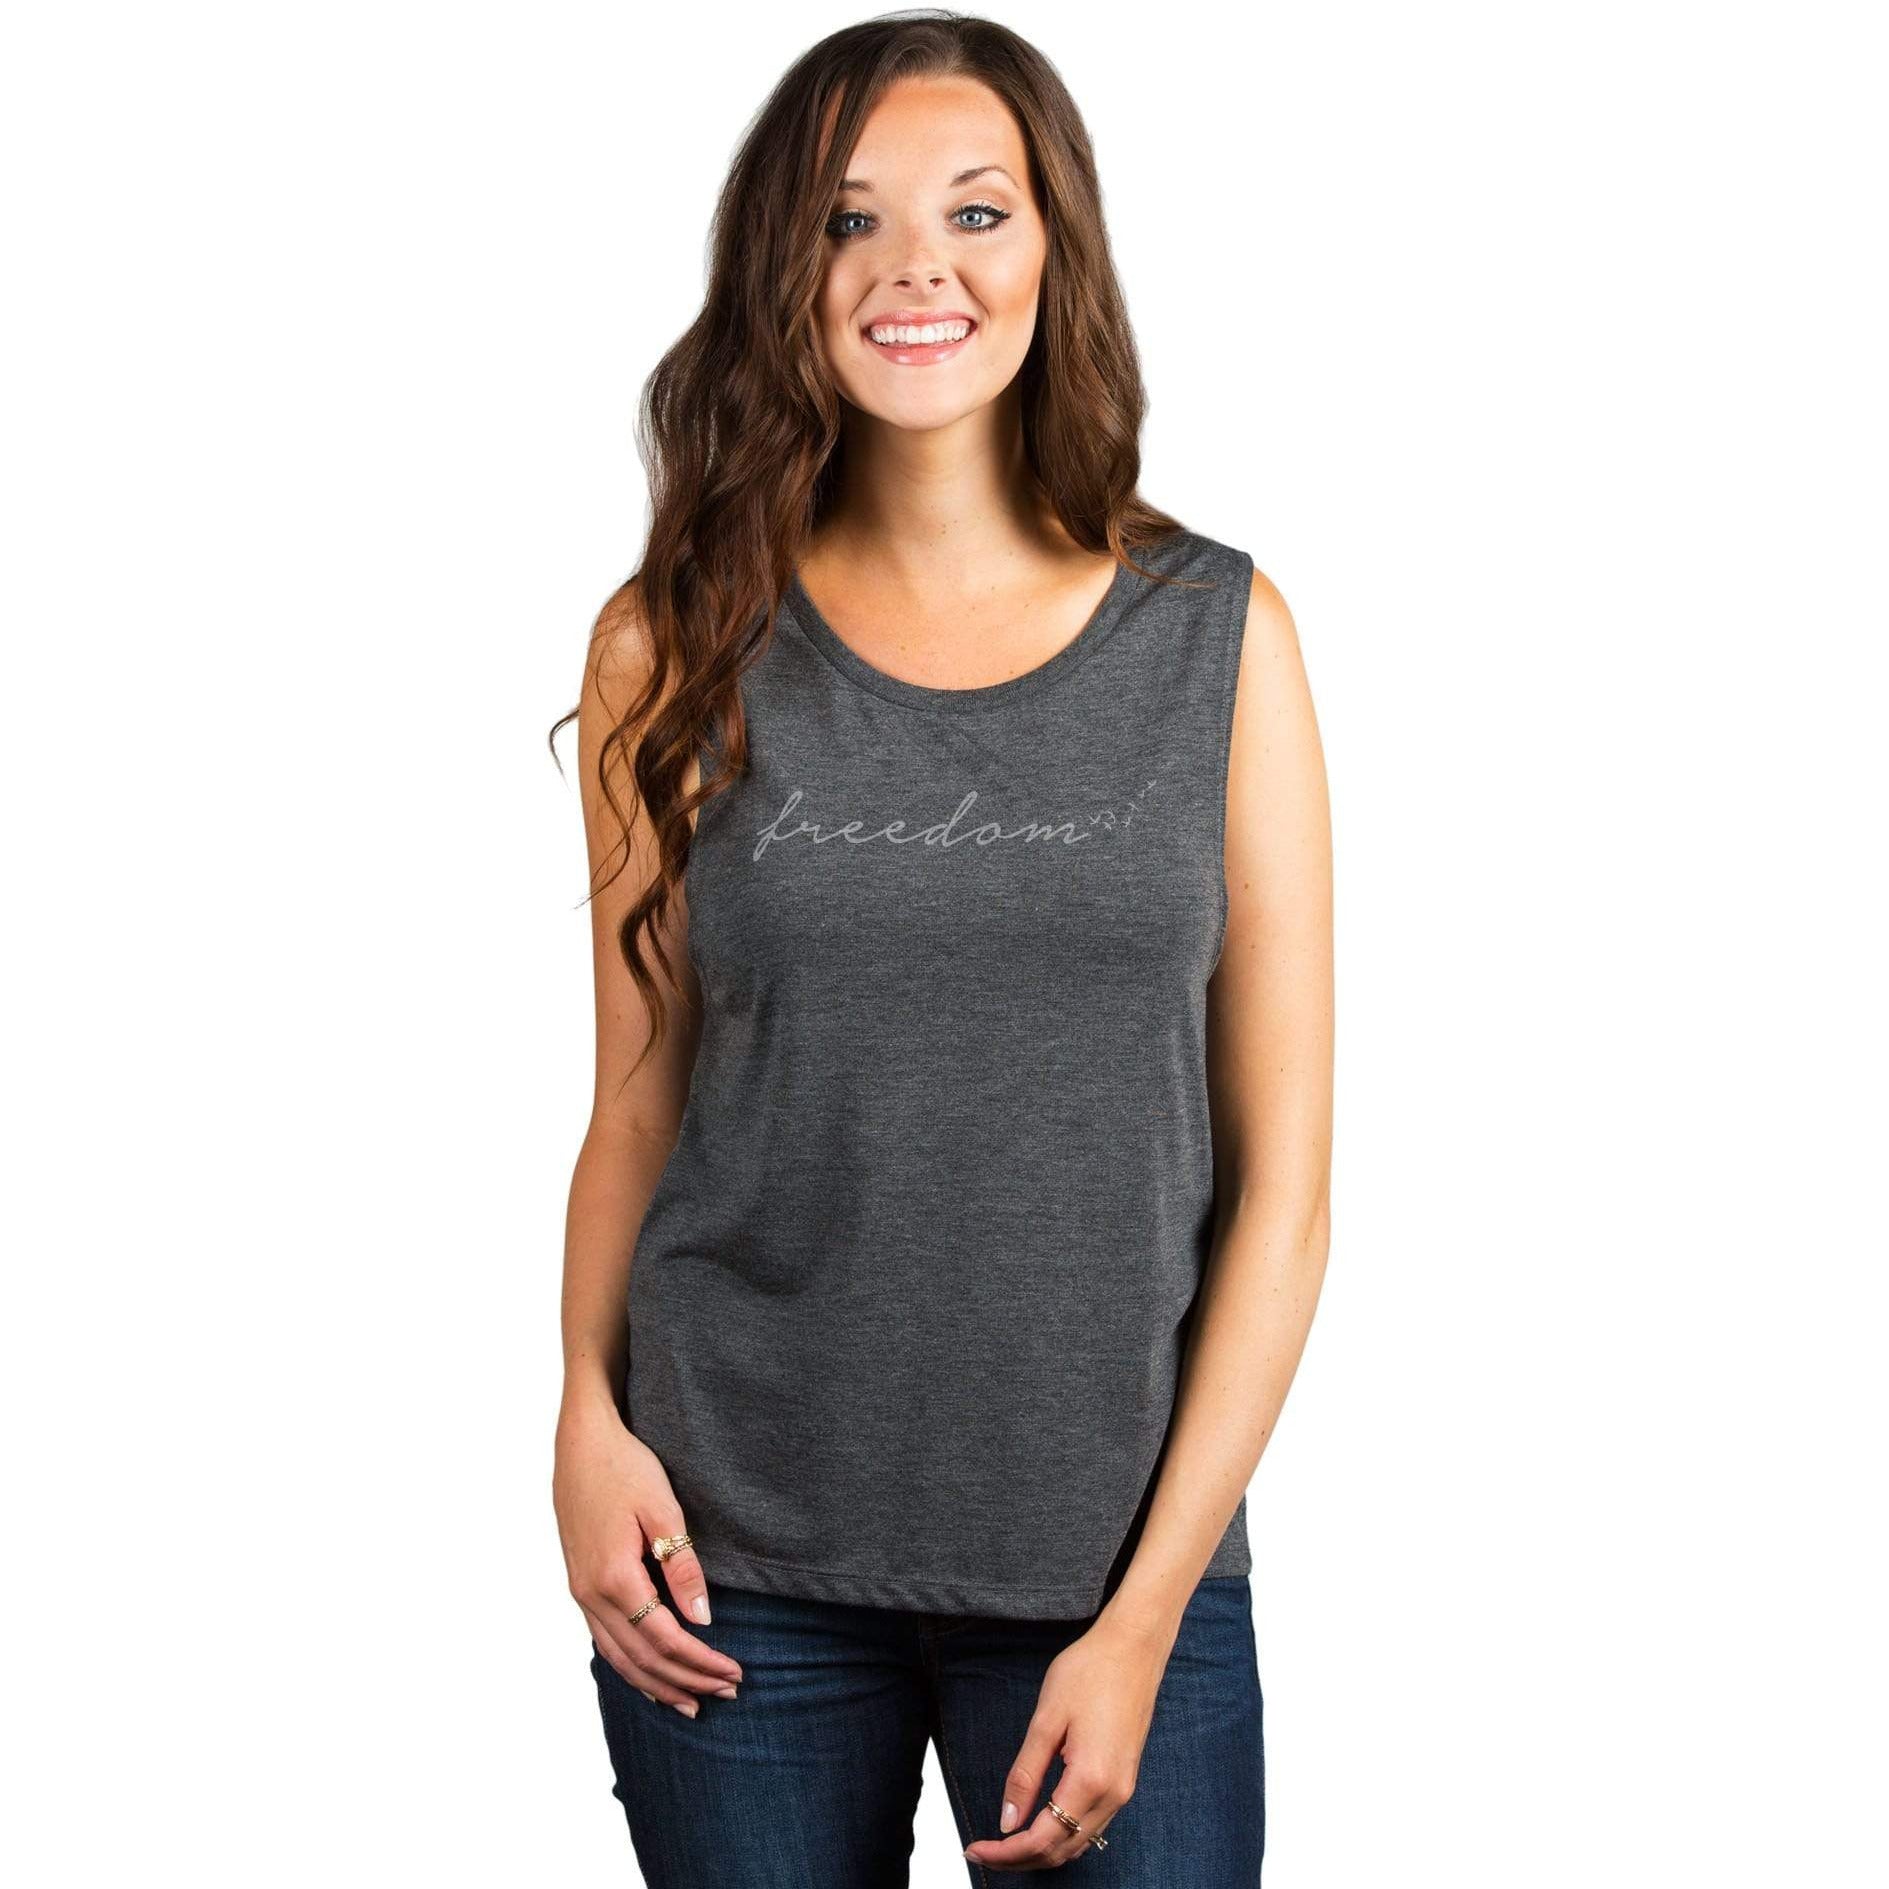 Freedome Script And Sunshine Women's Relaxed Muscle Tank Tee Charcoal Model
